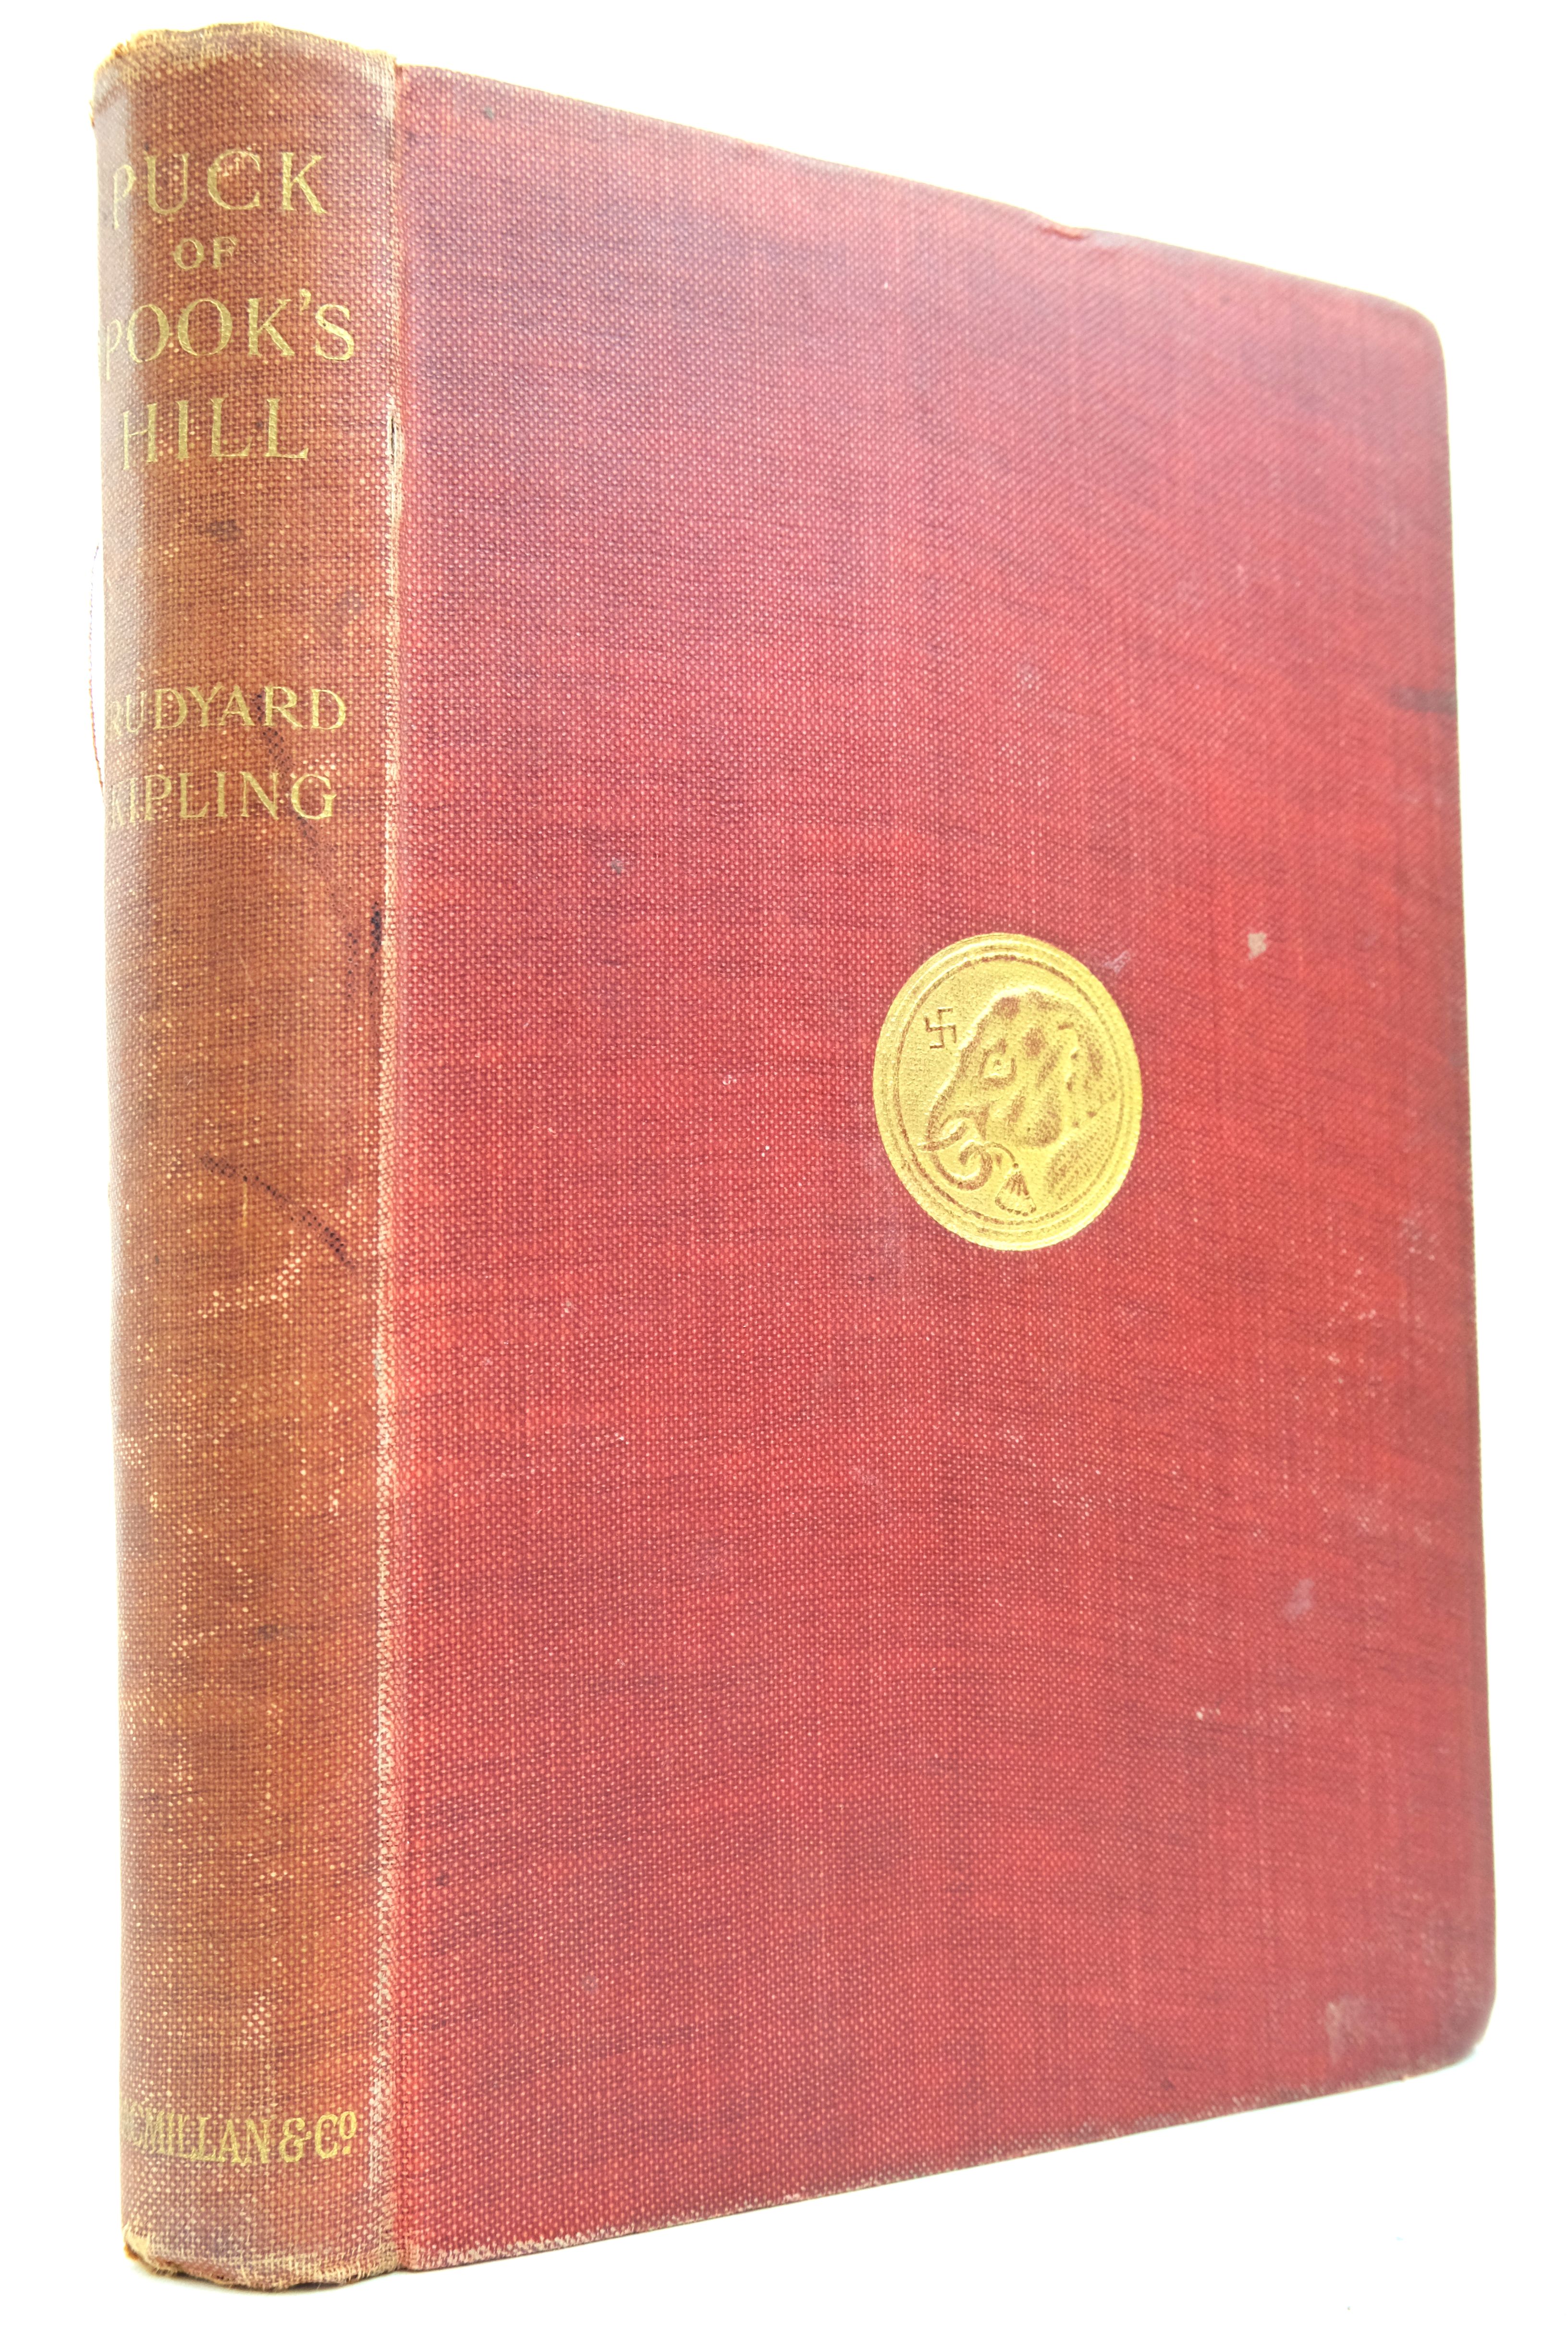 Photo of PUCK OF POOK'S HILL written by Kipling, Rudyard illustrated by Millar, H.R. published by Macmillan &amp; Co. Ltd. (STOCK CODE: 2140436)  for sale by Stella & Rose's Books